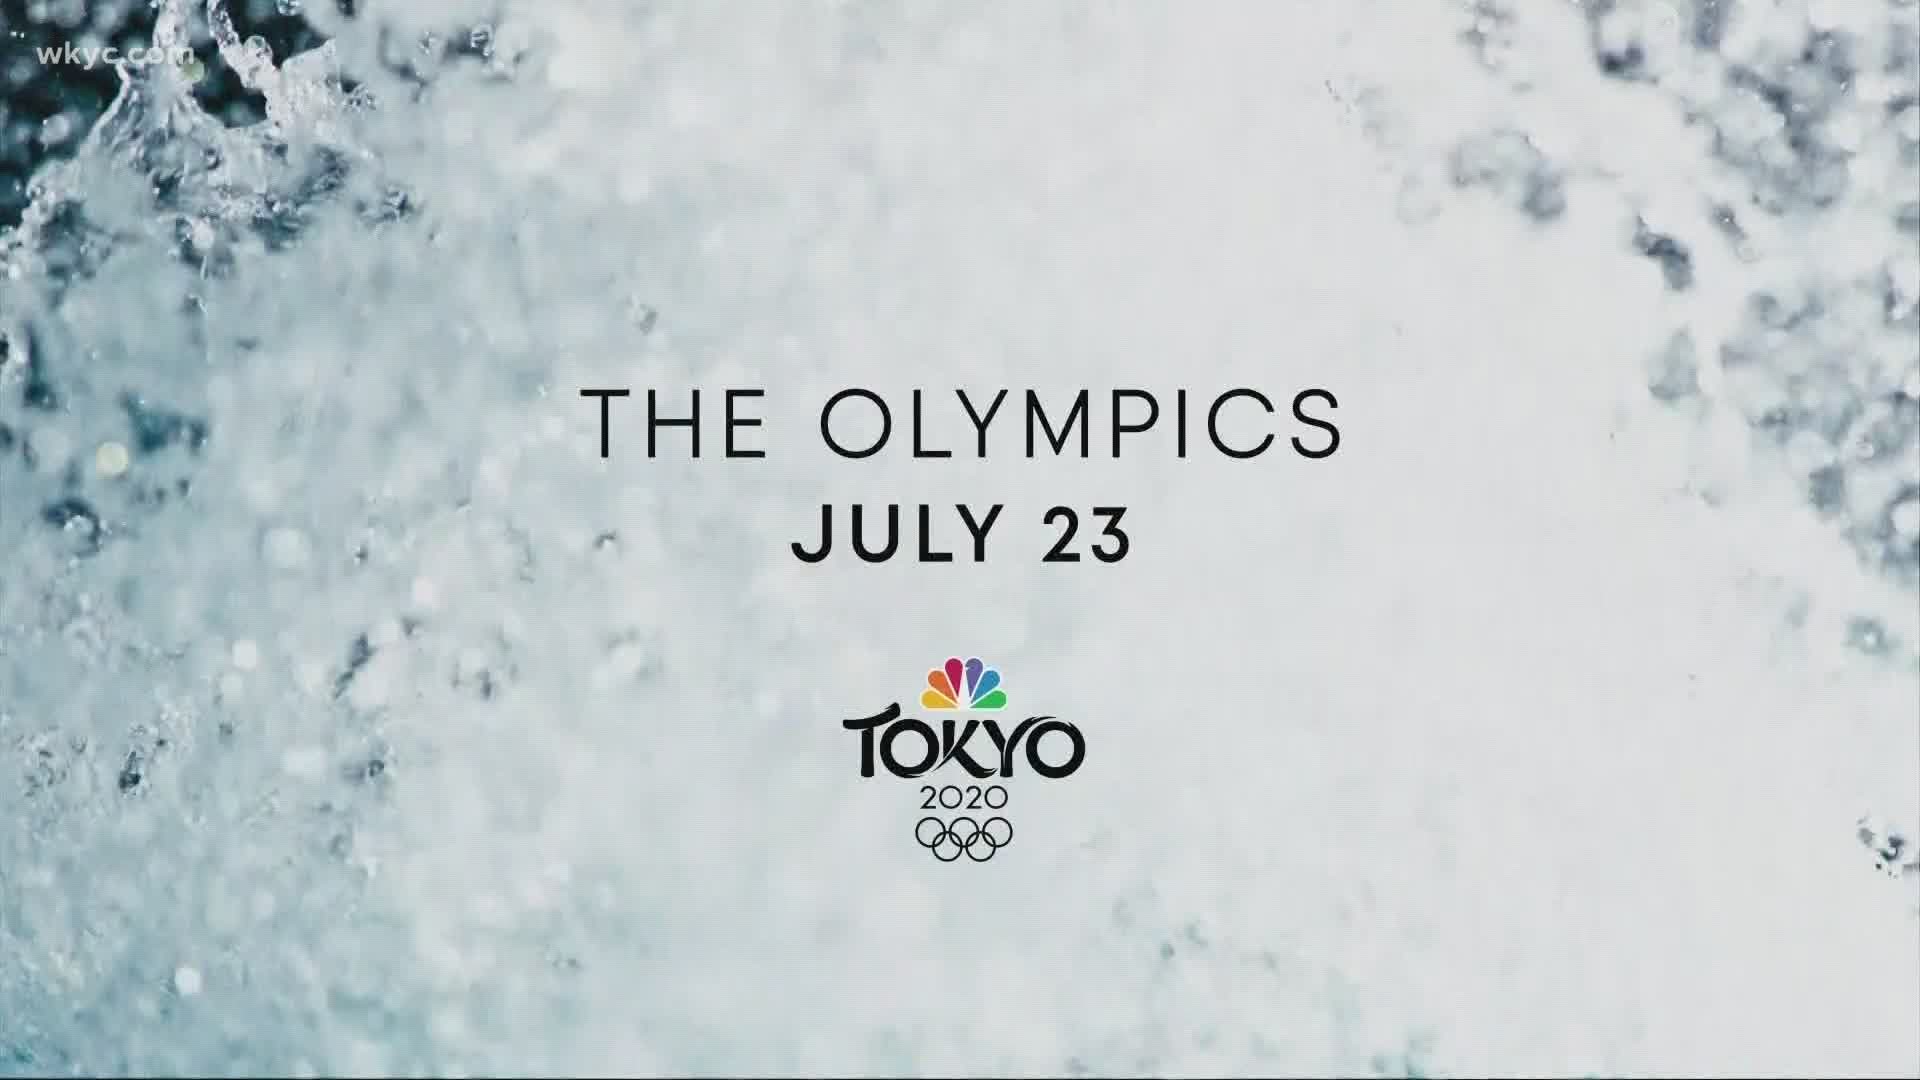 The Tokyo Olympics is set to kick off in just over a month and people all around the world are getting very excited.